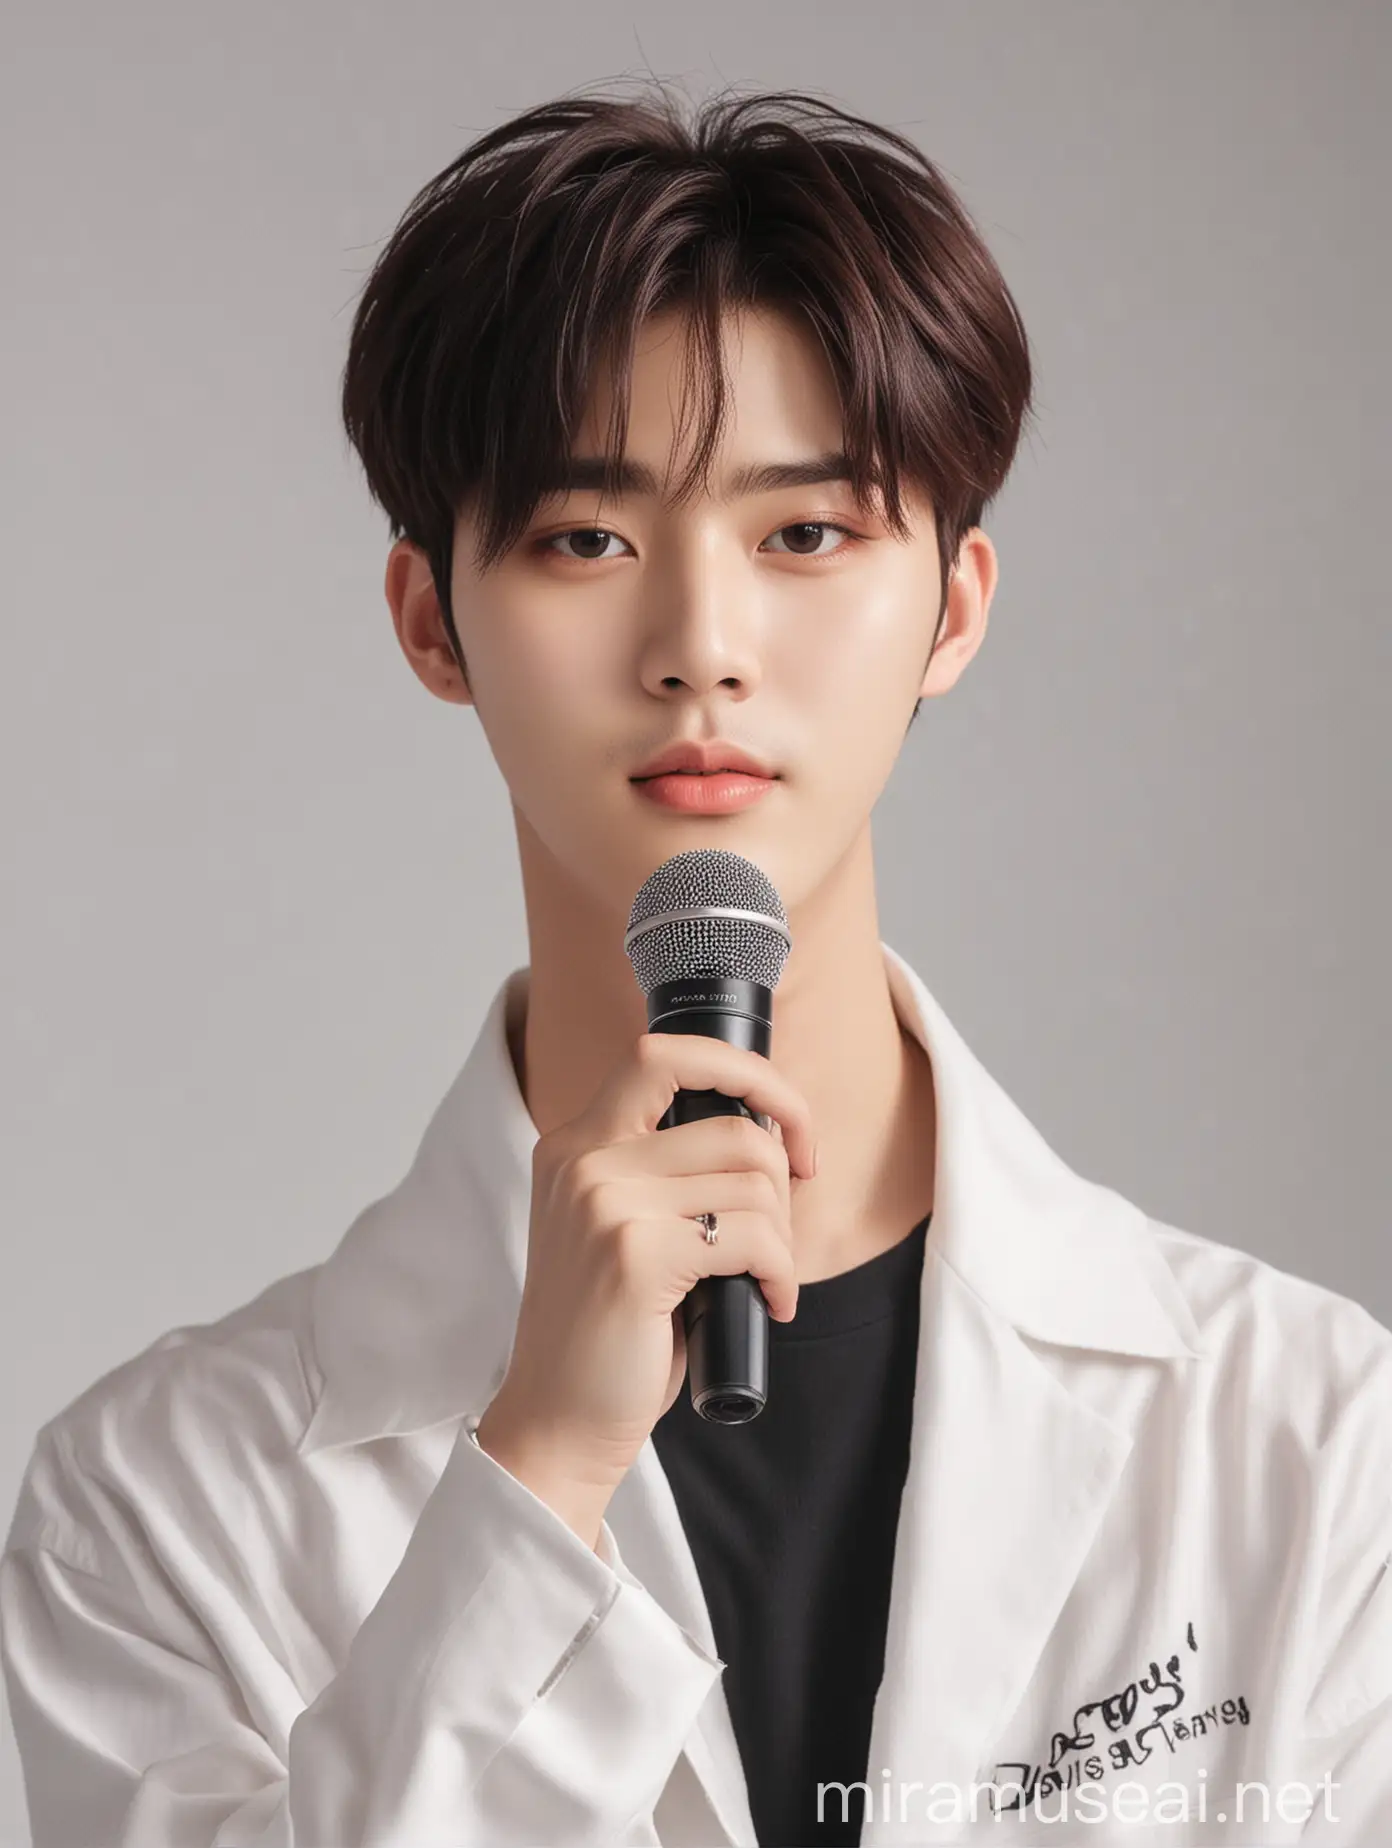 handsome, posing like a kpop idol, holding a microphone looks like Cha Eun Woo of Astro, handsome and soft and kind boy look. Fair skin and so handsome